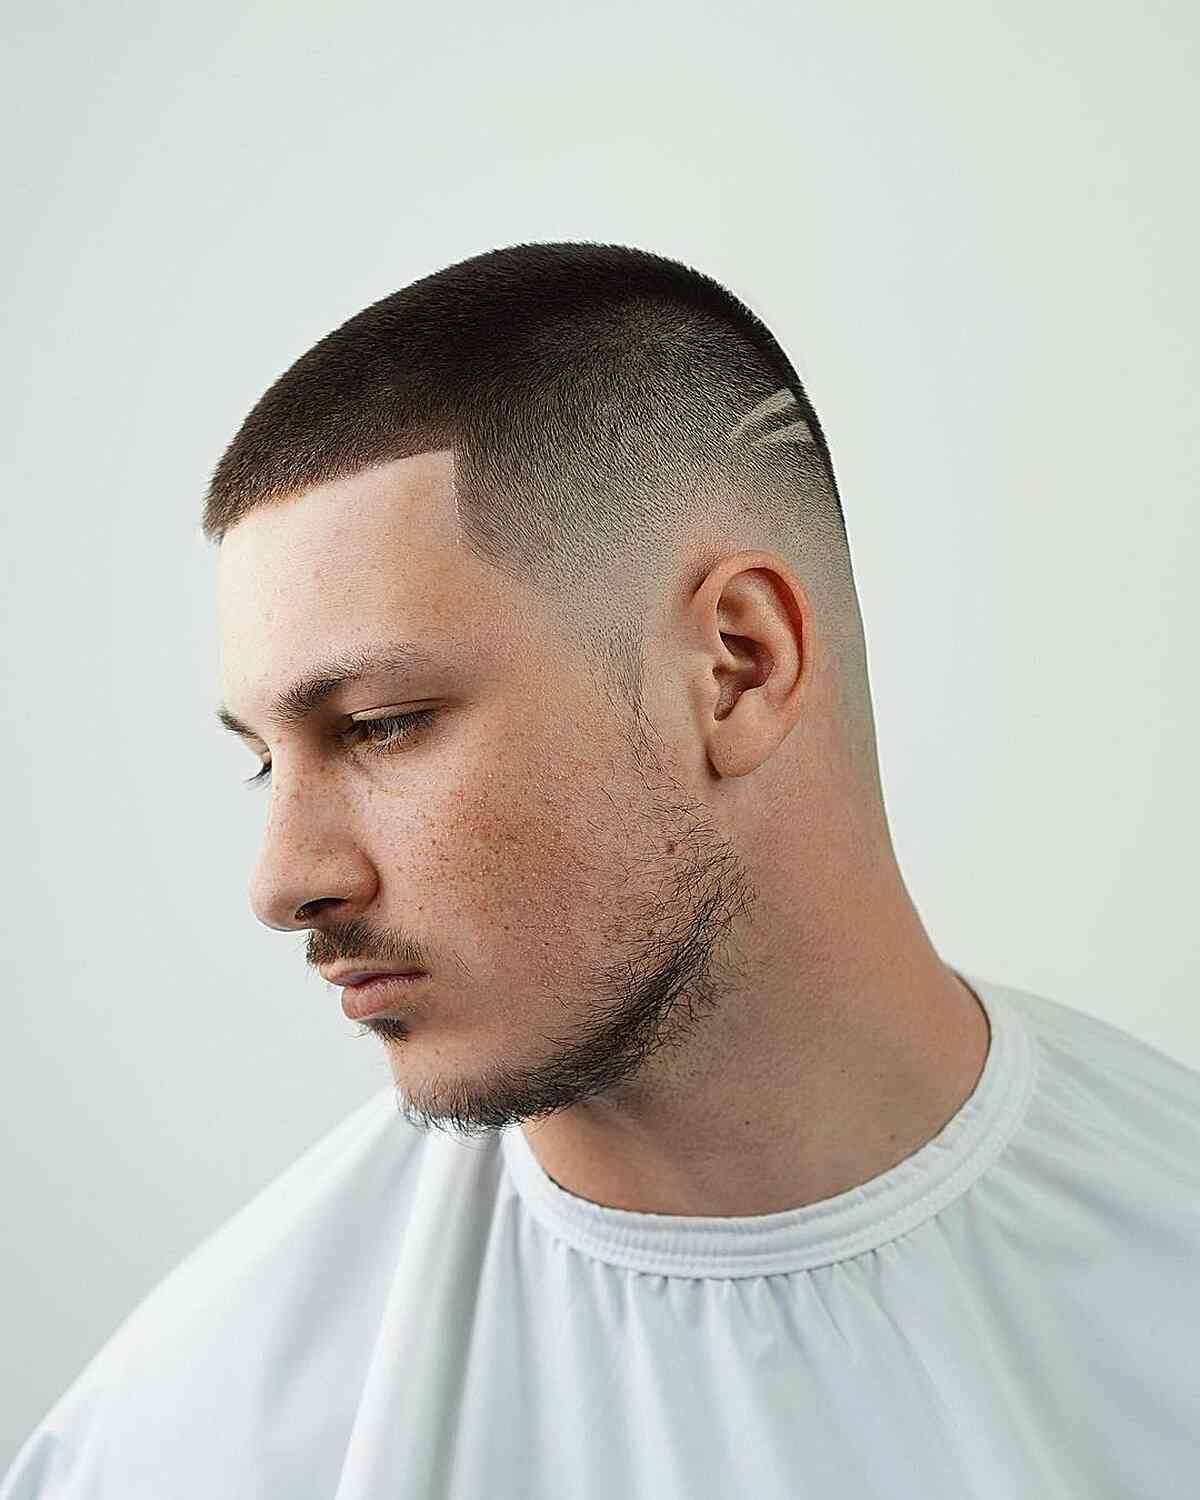 80 Men Hairstyles For Round Face-Neat Buzz Cut Always Works